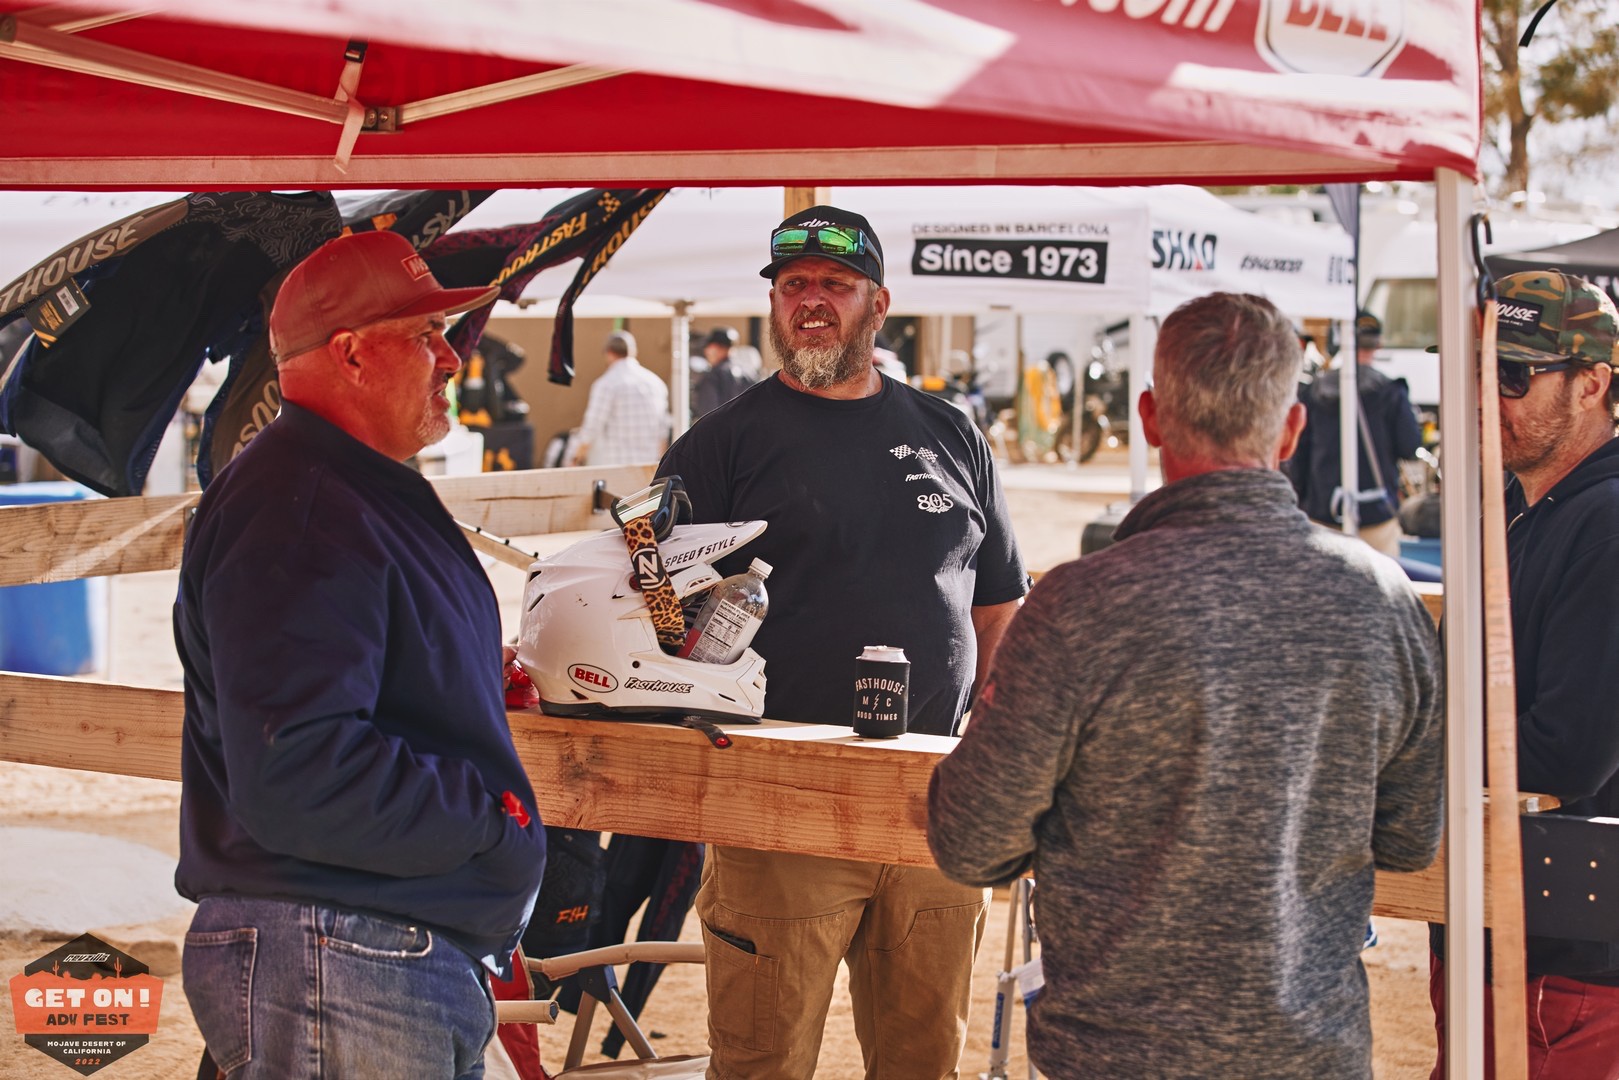 Eric Wright and Chris Sackett from Fasthouse chat with participants at the GET ON! Adv Fest rally in Mojave.